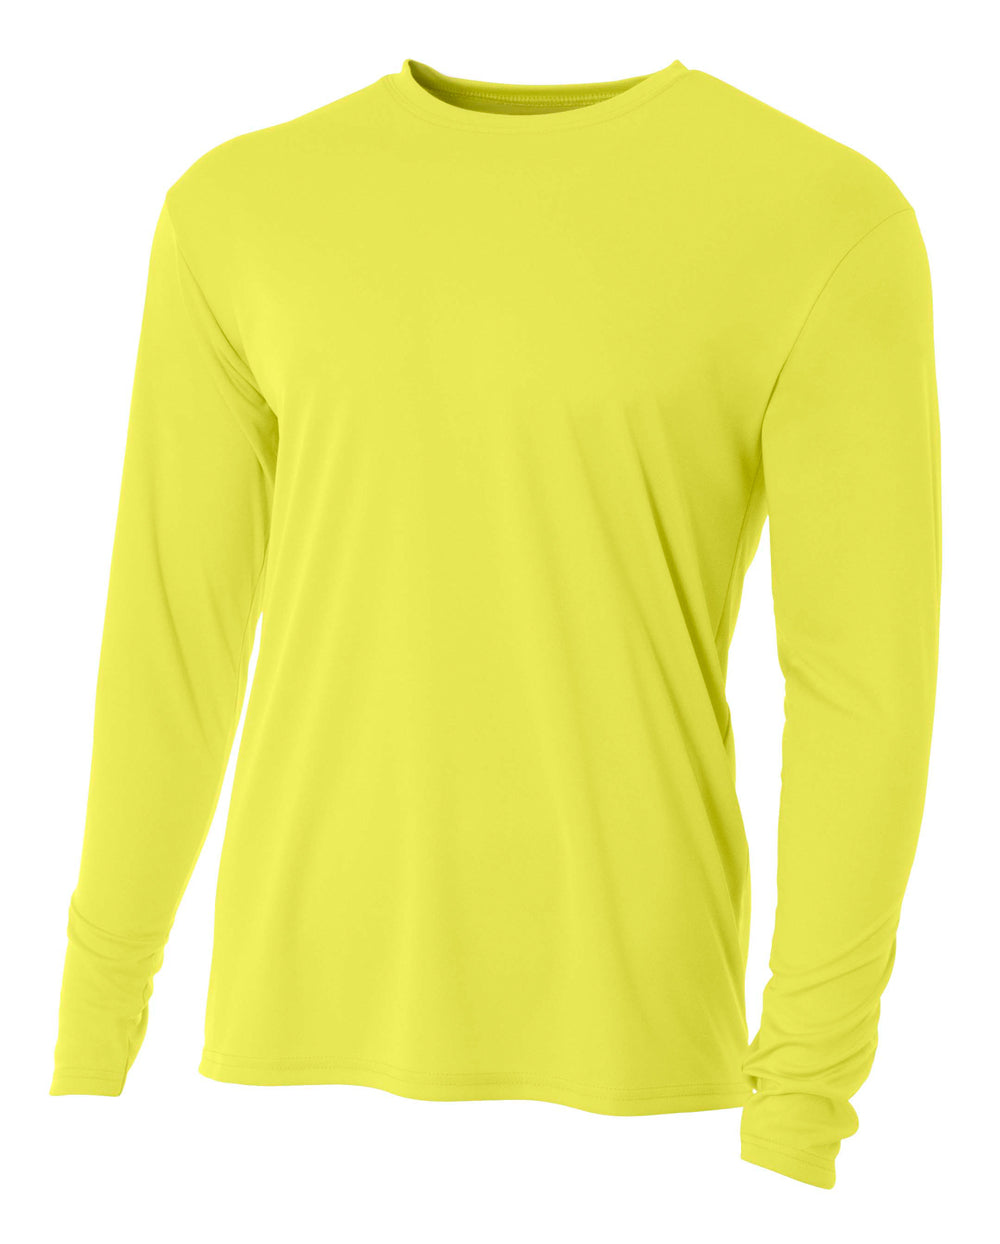 Safety Yellow A4 Cooling Performance Long Sleeve Crew